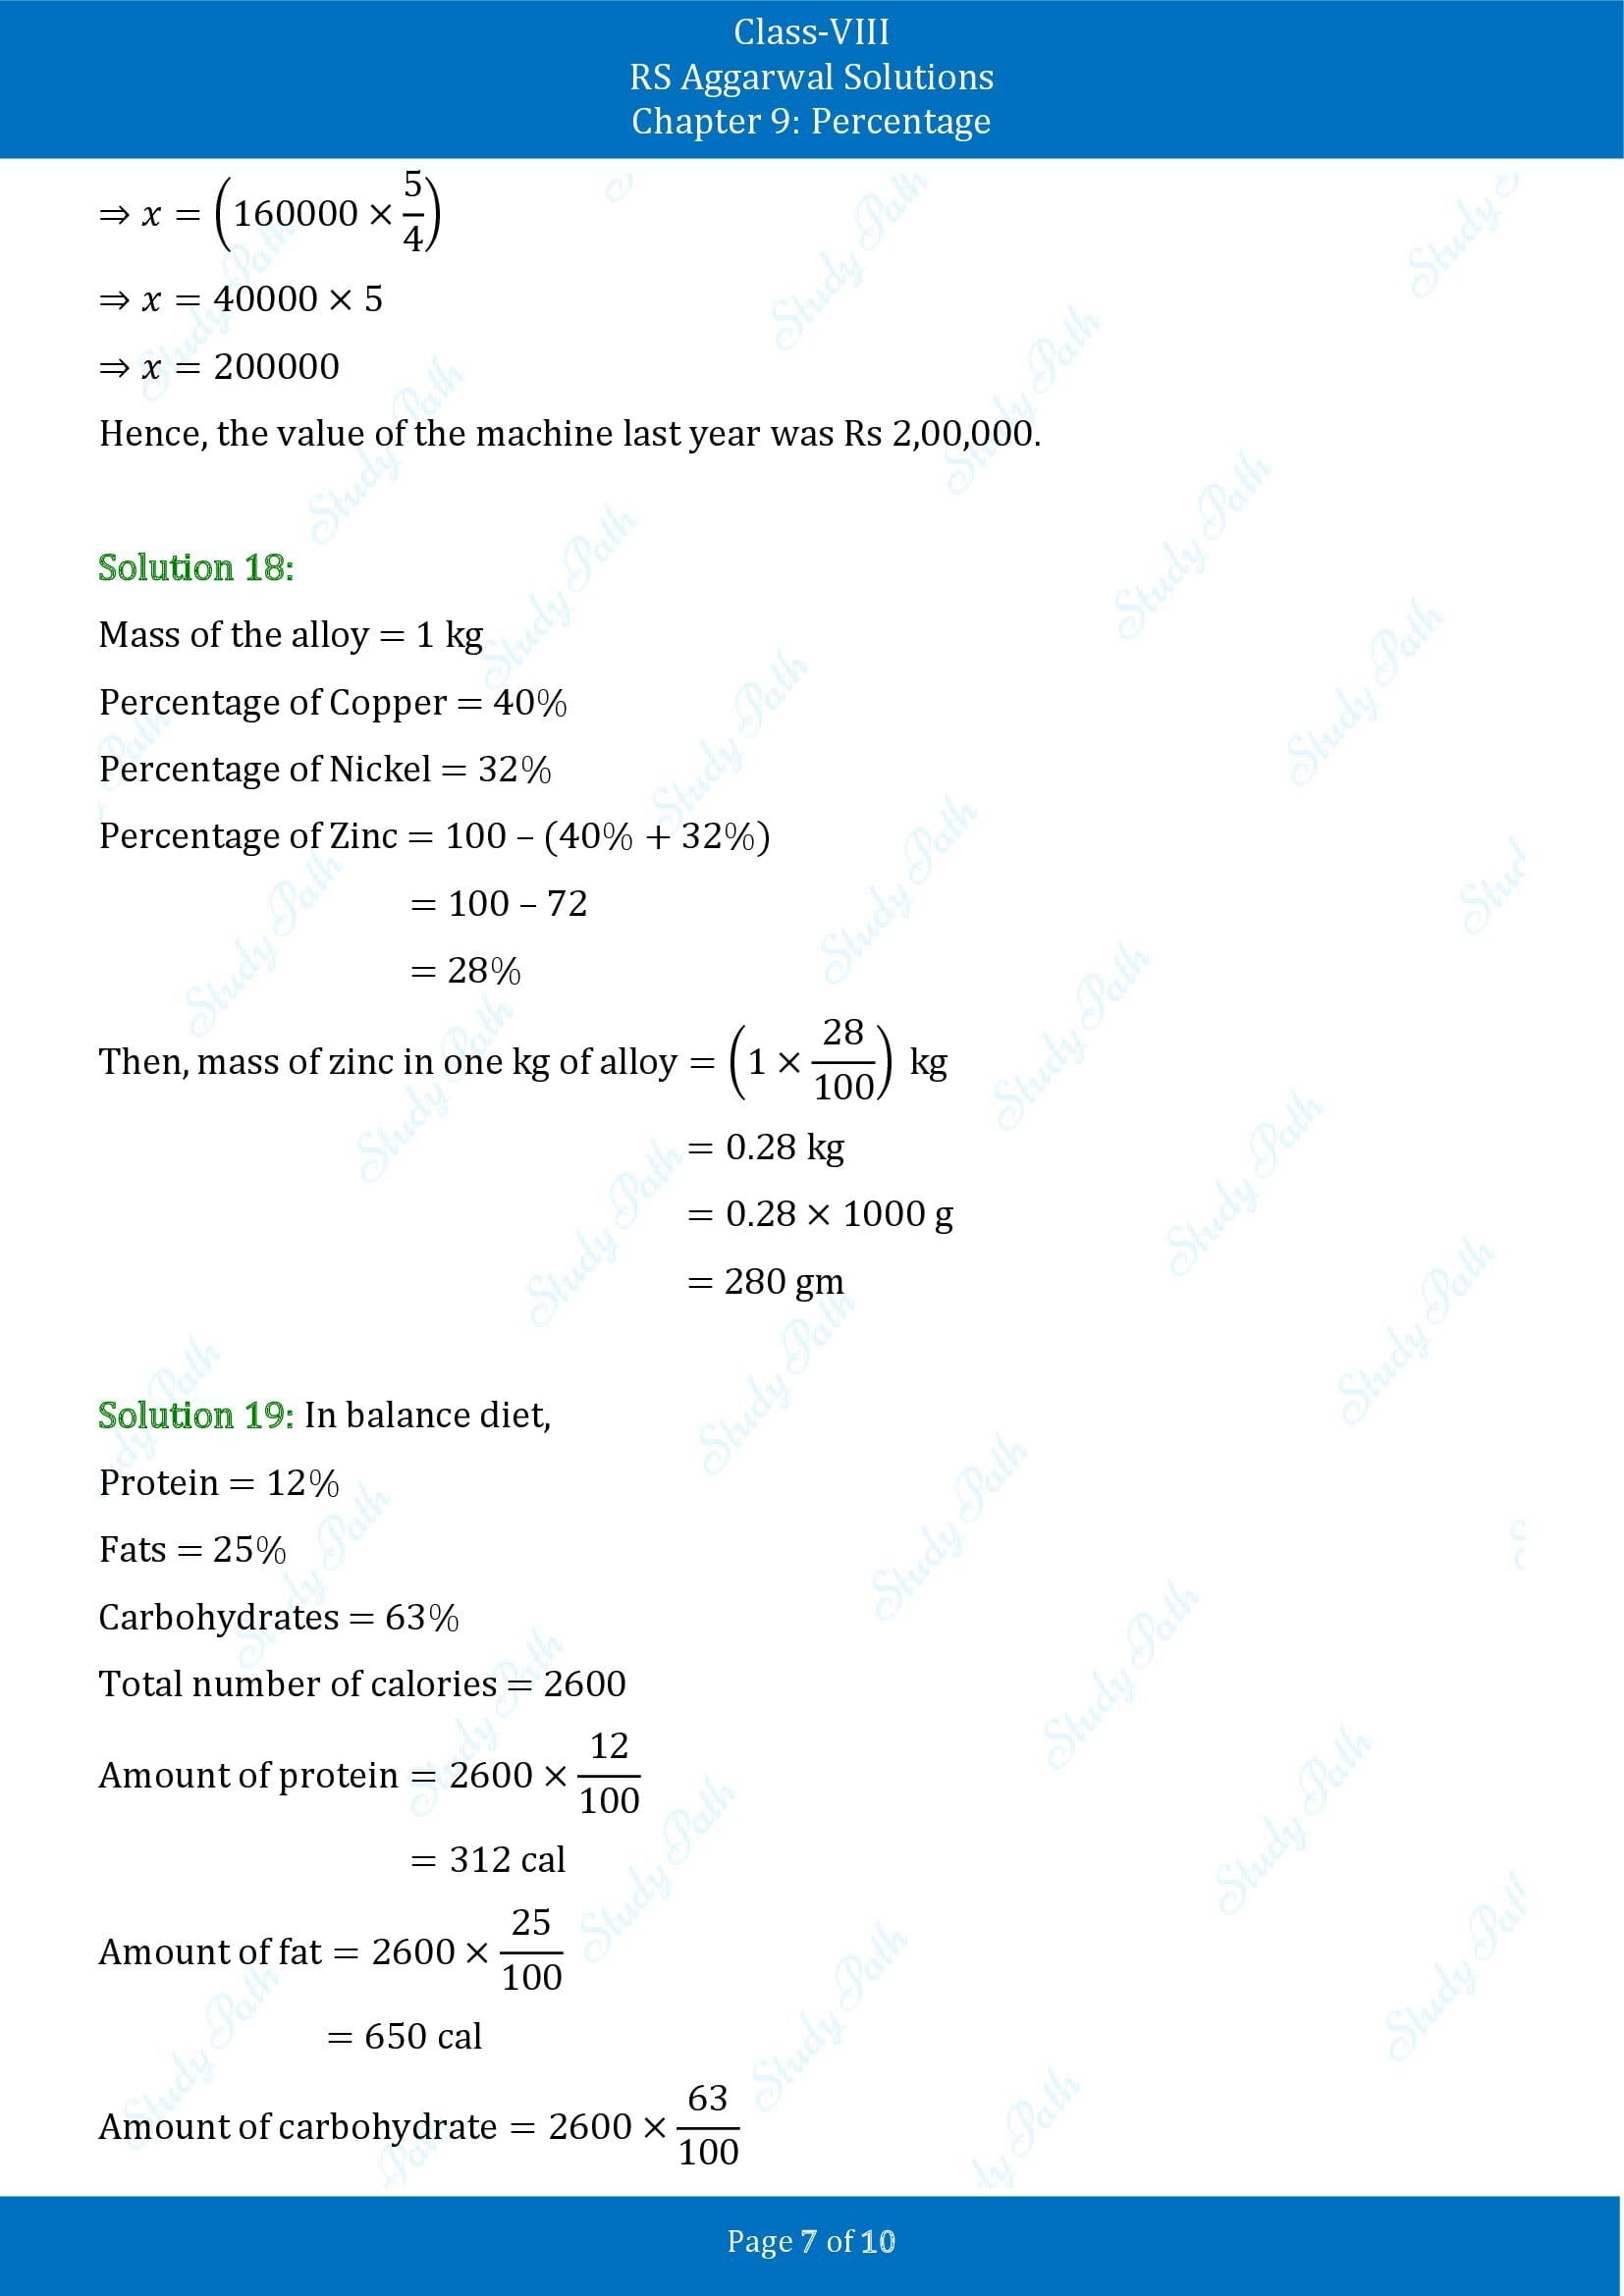 RS Aggarwal Solutions Class 8 Chapter 9 Percentage Exercise 9A 00007